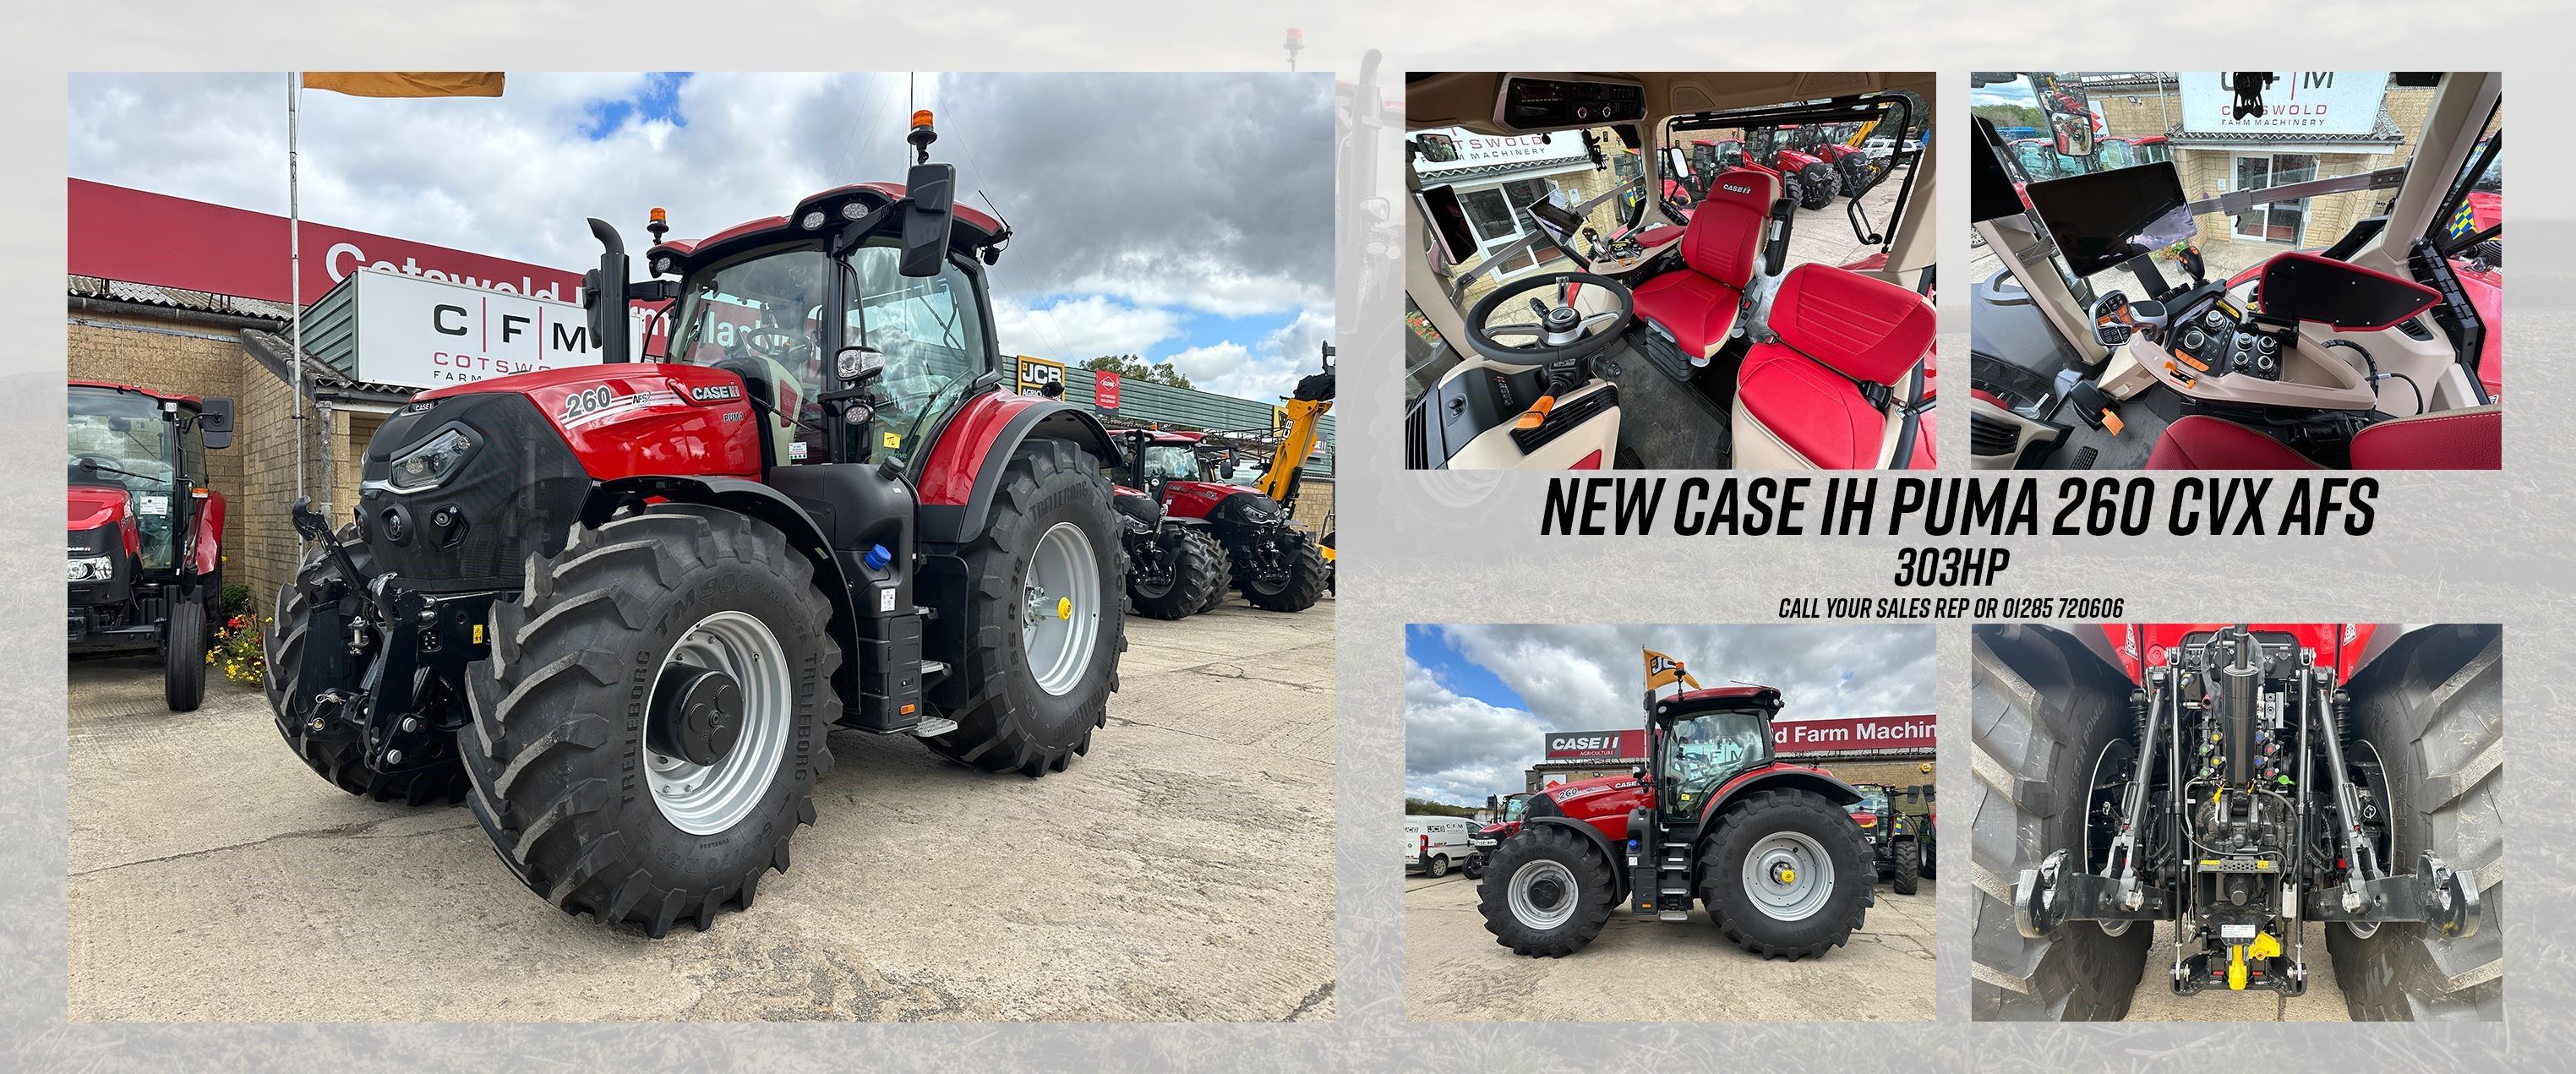 Click here to check out the NEW Case IH 260 CVX AFS